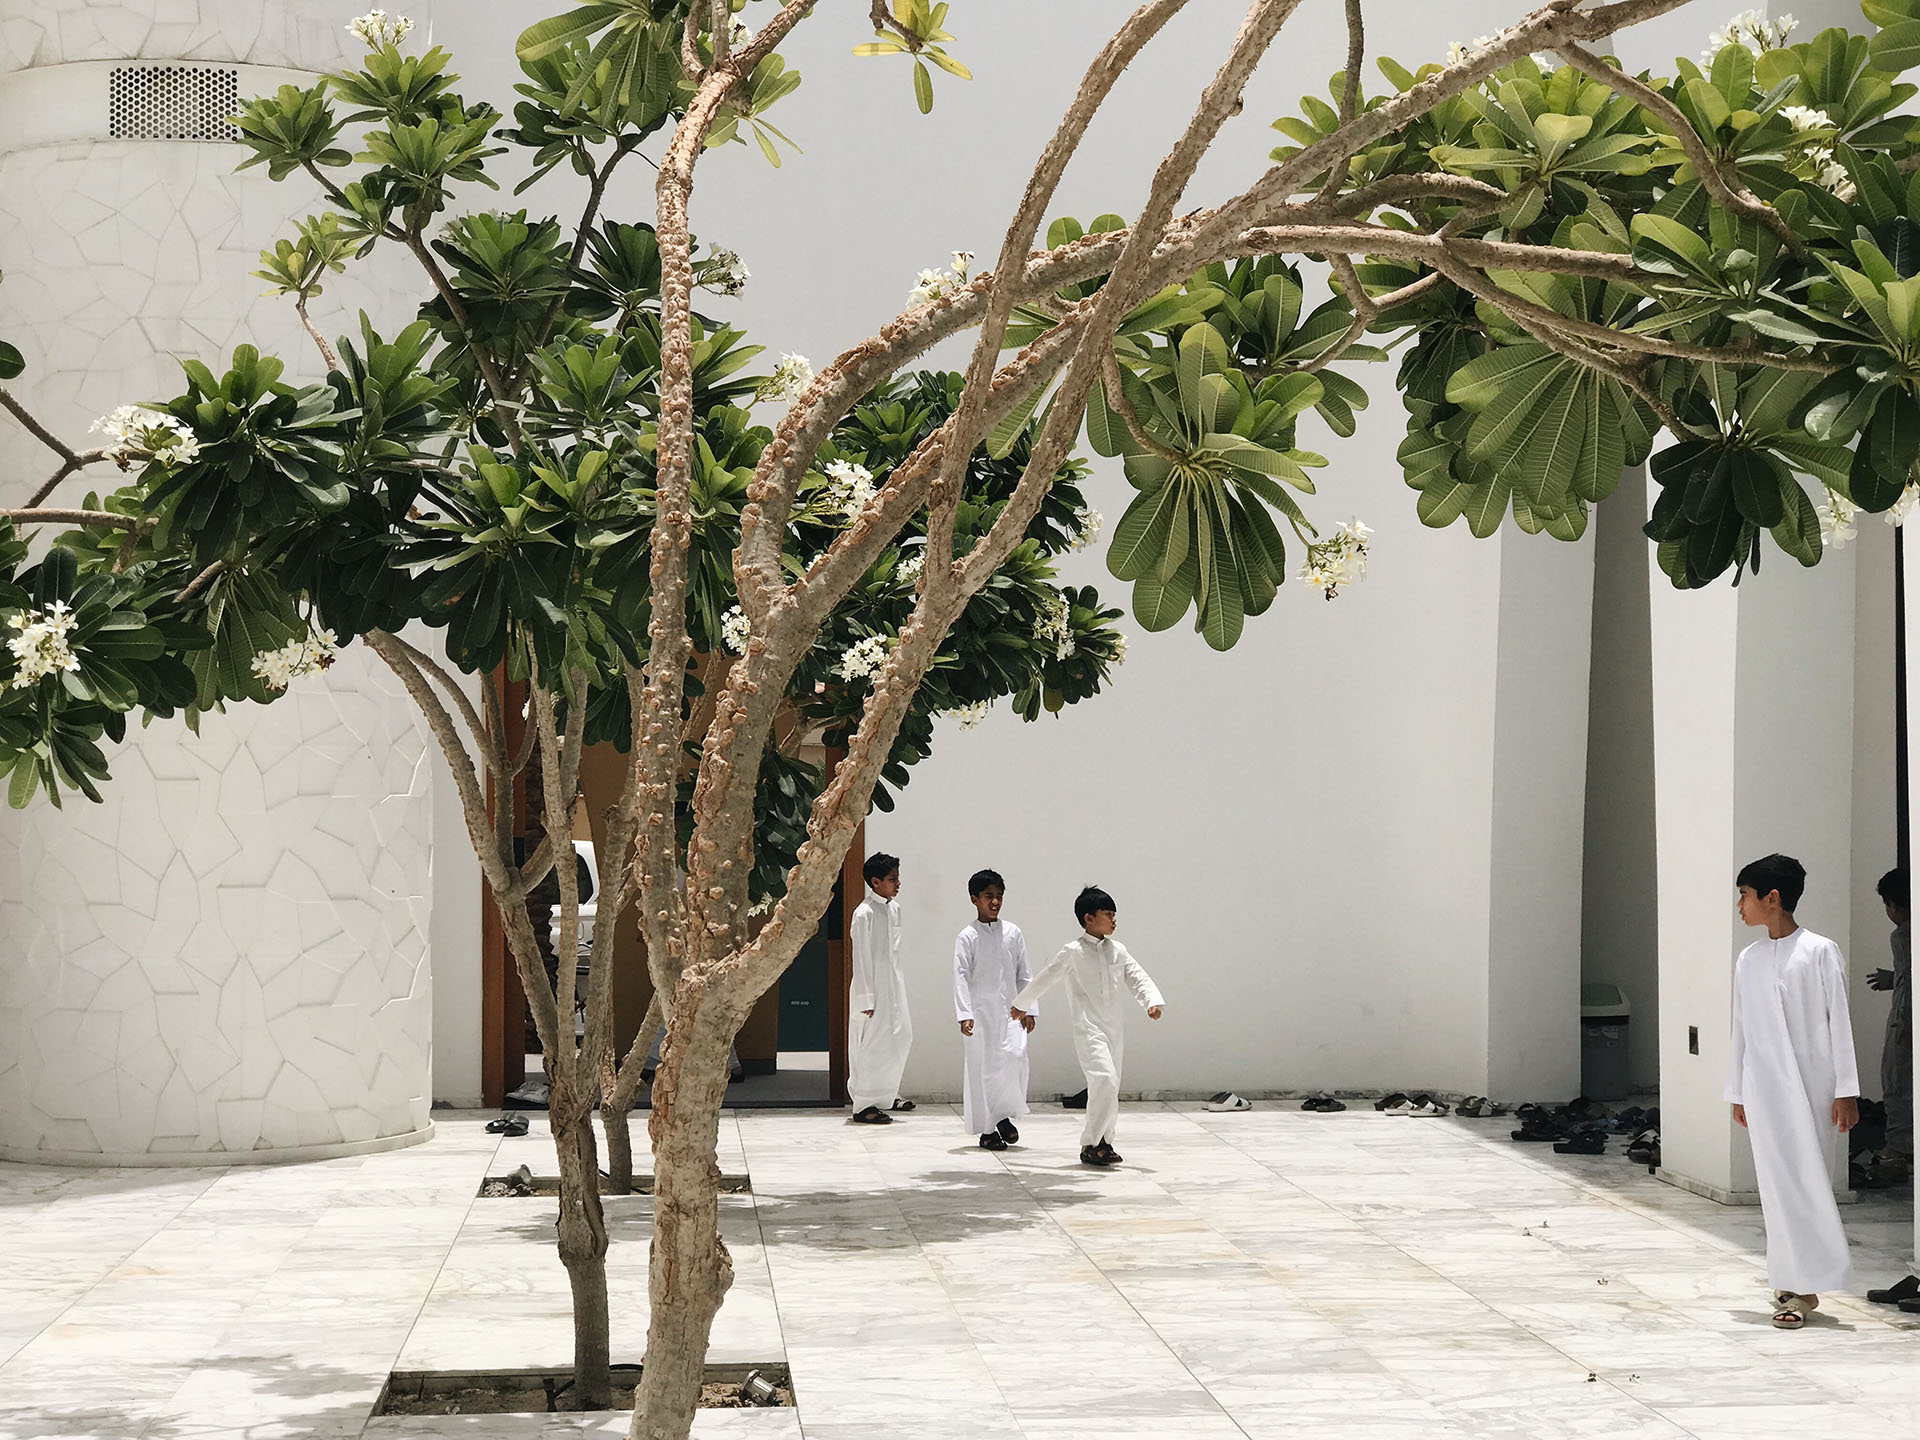 <p>Children arrive at the mosque, passing</p><p>through the courtyard.</p>